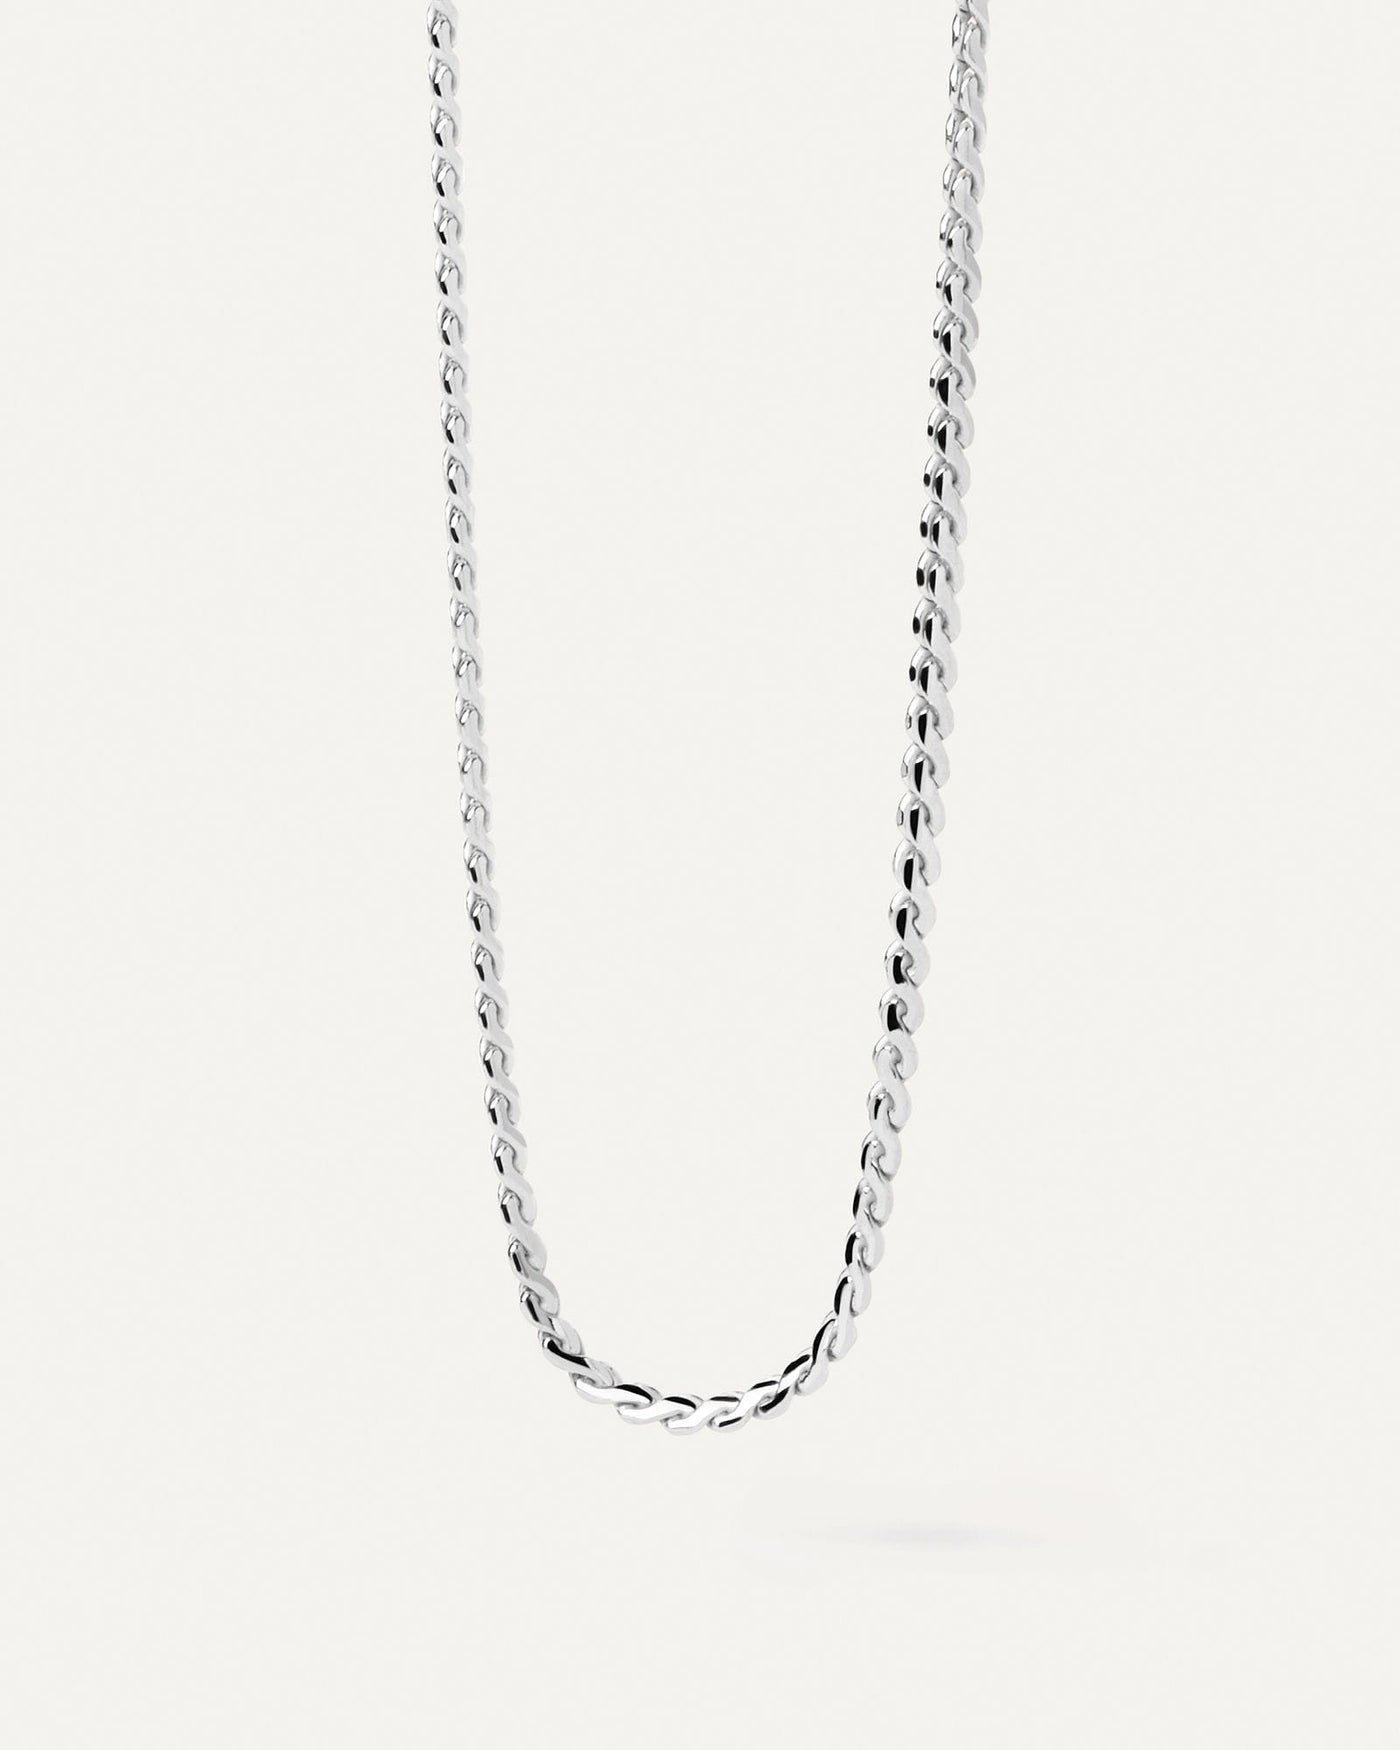 2024 Selection | Serpentine Silver Chain Necklace. Modern serpentine silver chain necklace with braided links. Get the latest arrival from PDPAOLA. Place your order safely and get this Best Seller. Free Shipping.